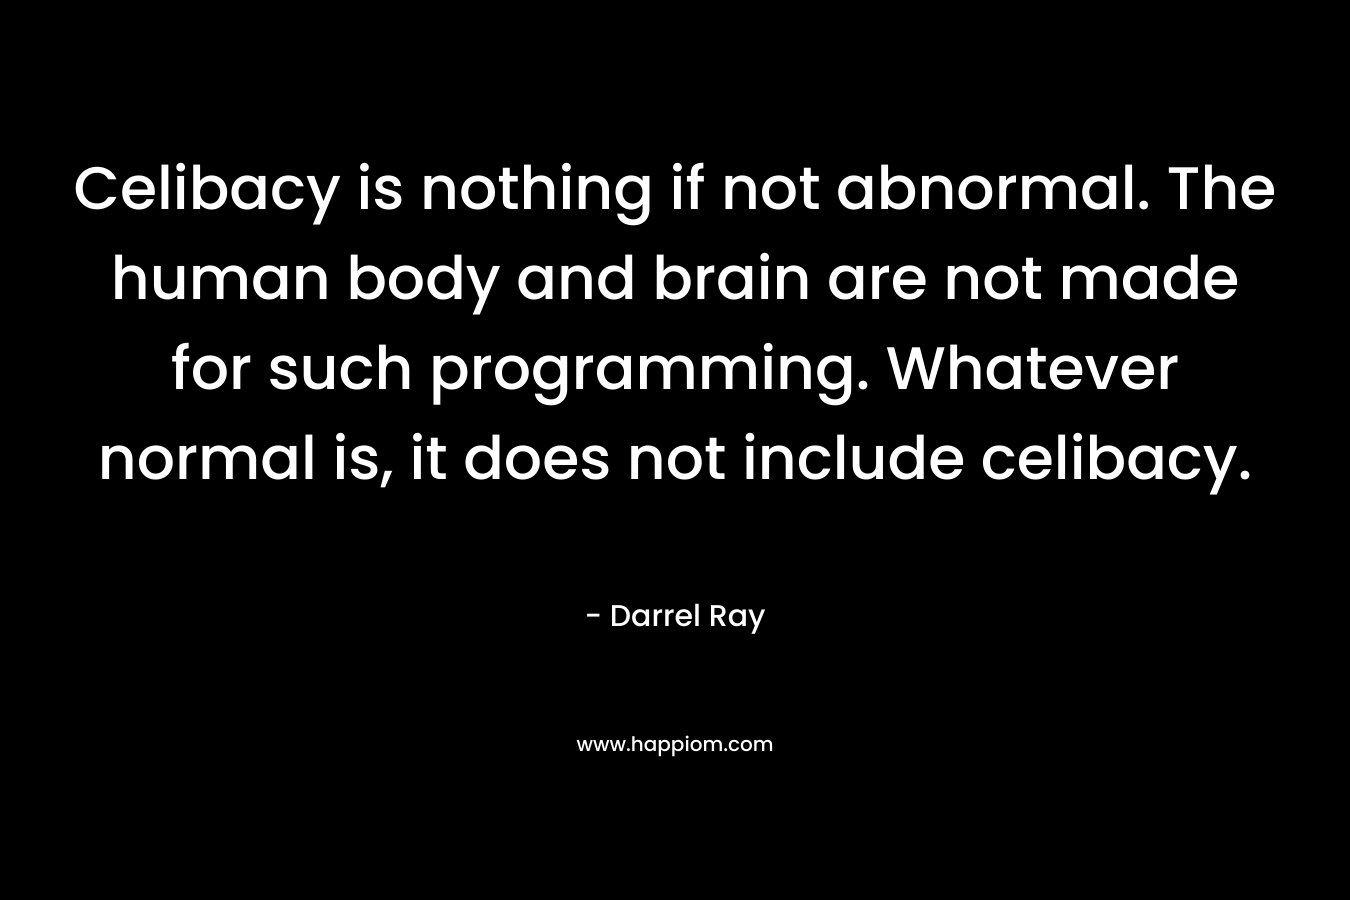 Celibacy is nothing if not abnormal. The human body and brain are not made for such programming. Whatever normal is, it does not include celibacy. – Darrel Ray